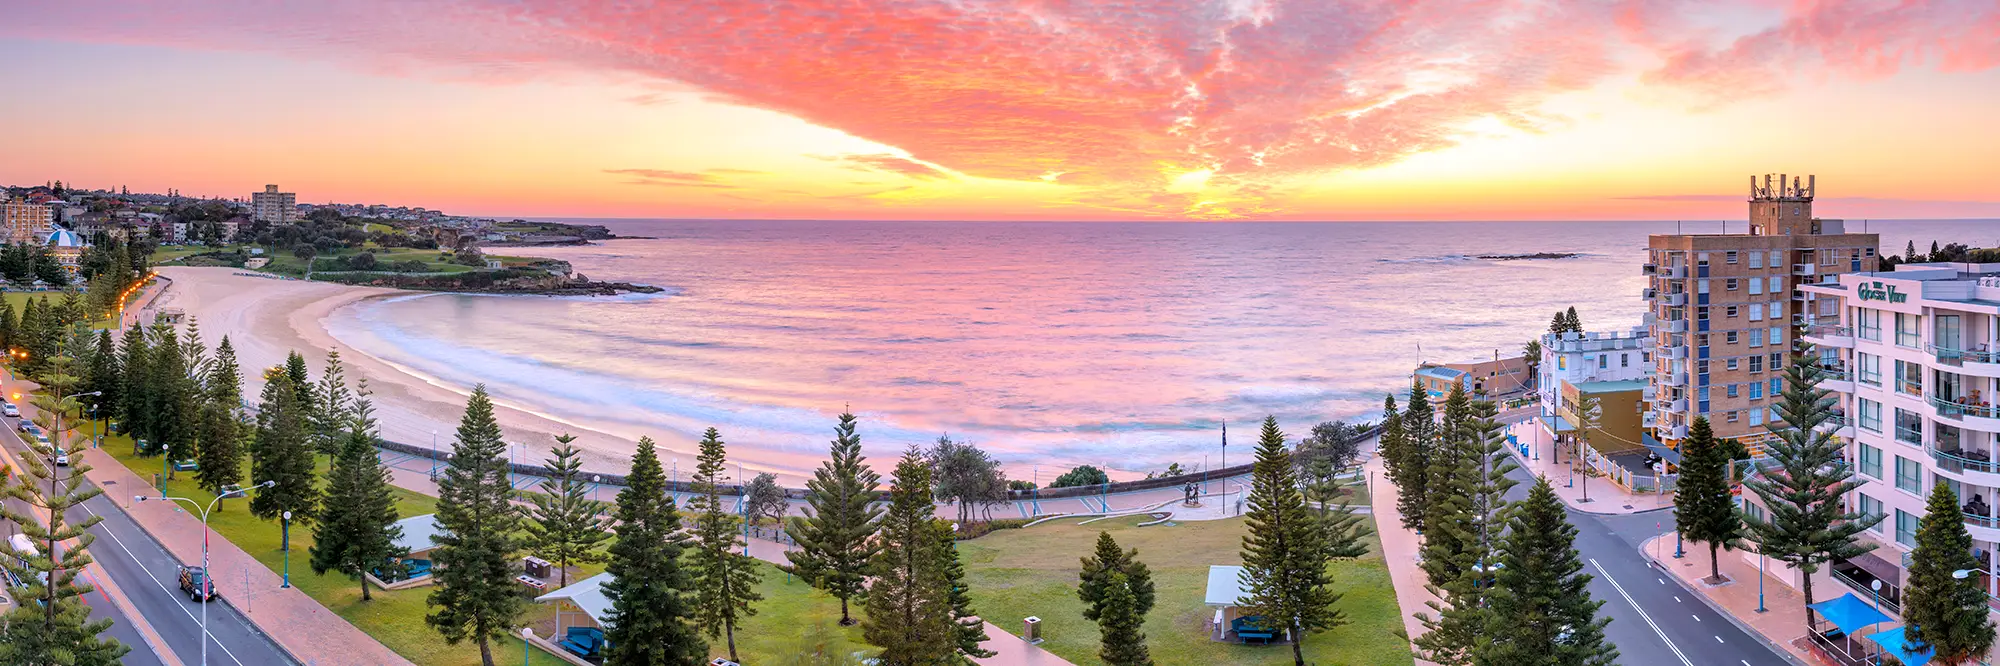 Coogee Beach Red Dawn Panoramic Landscape Acrylic Photo Prints